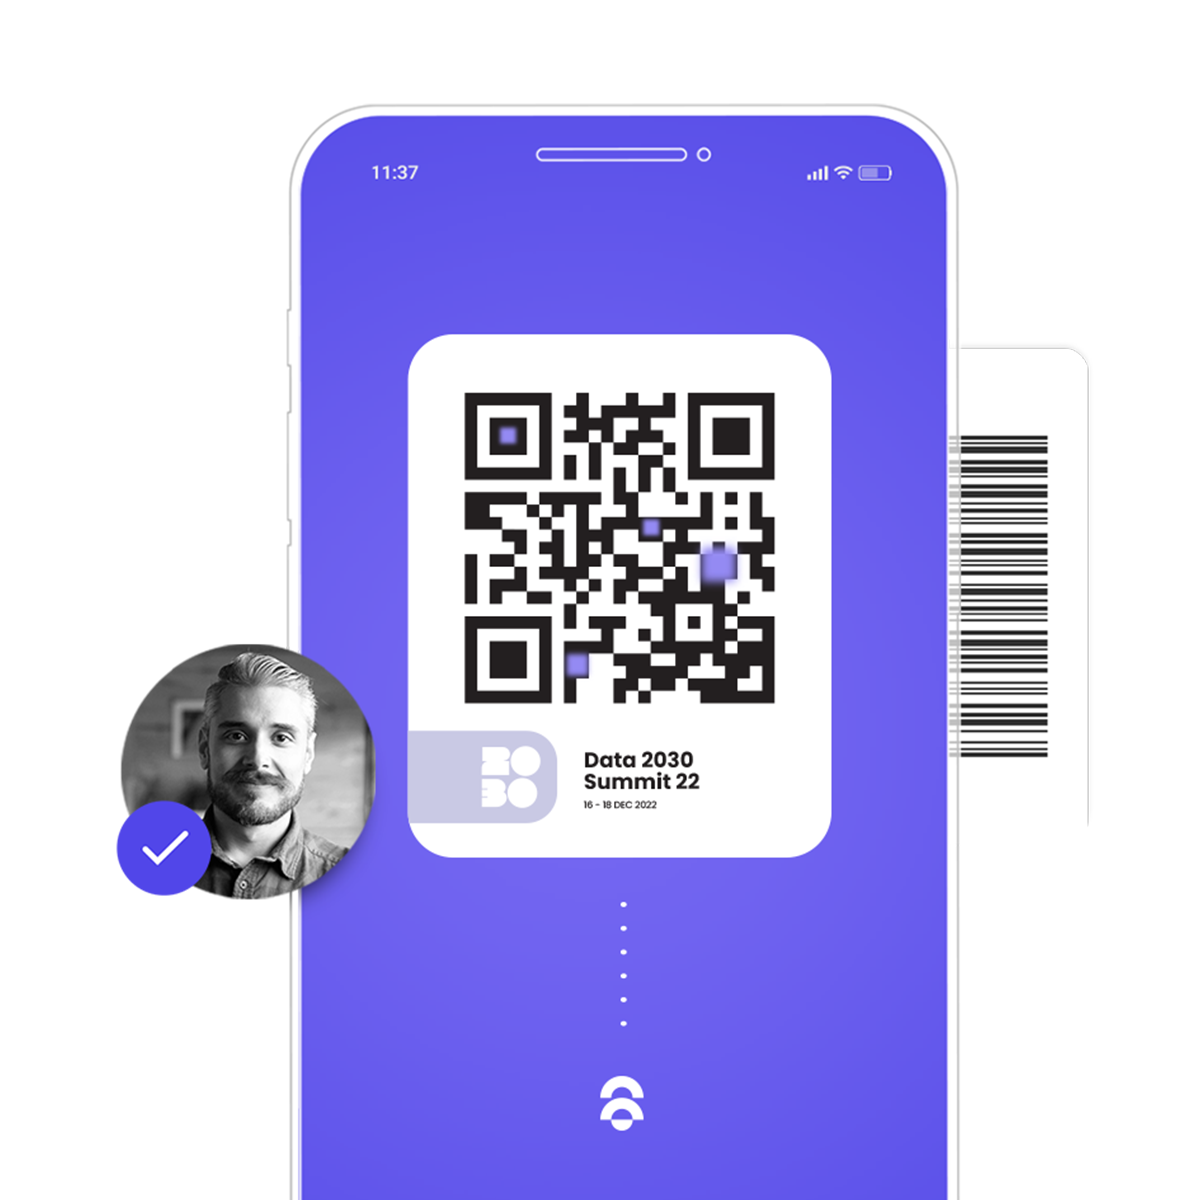 Self check-in and on-demand Badge printing